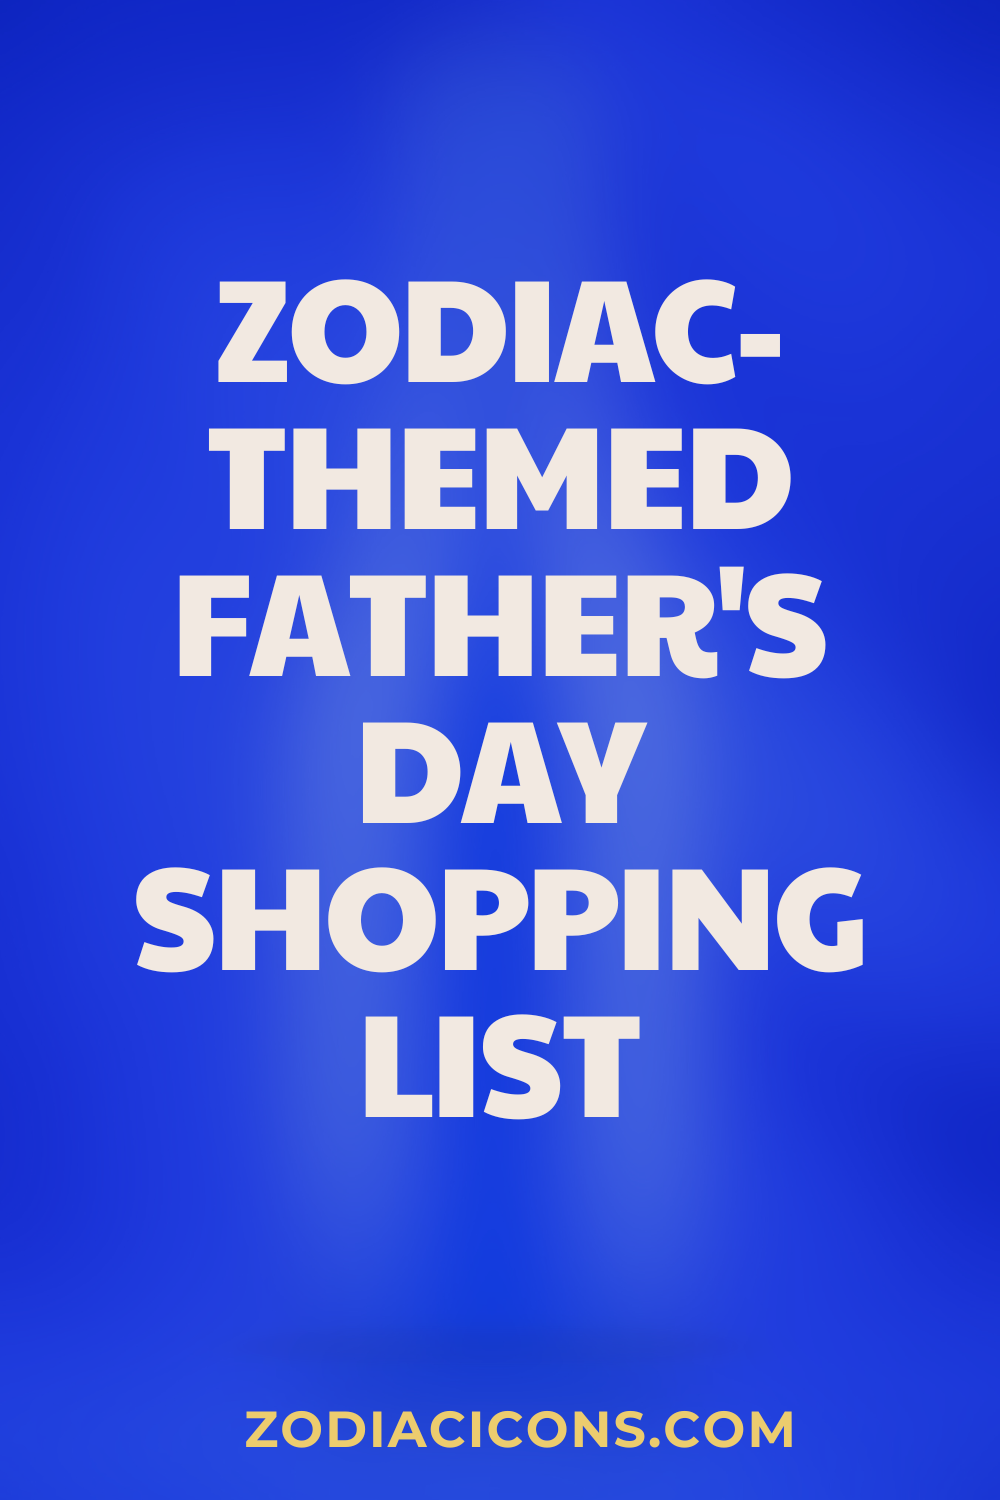 Zodiac-Themed Father's Day Shopping List